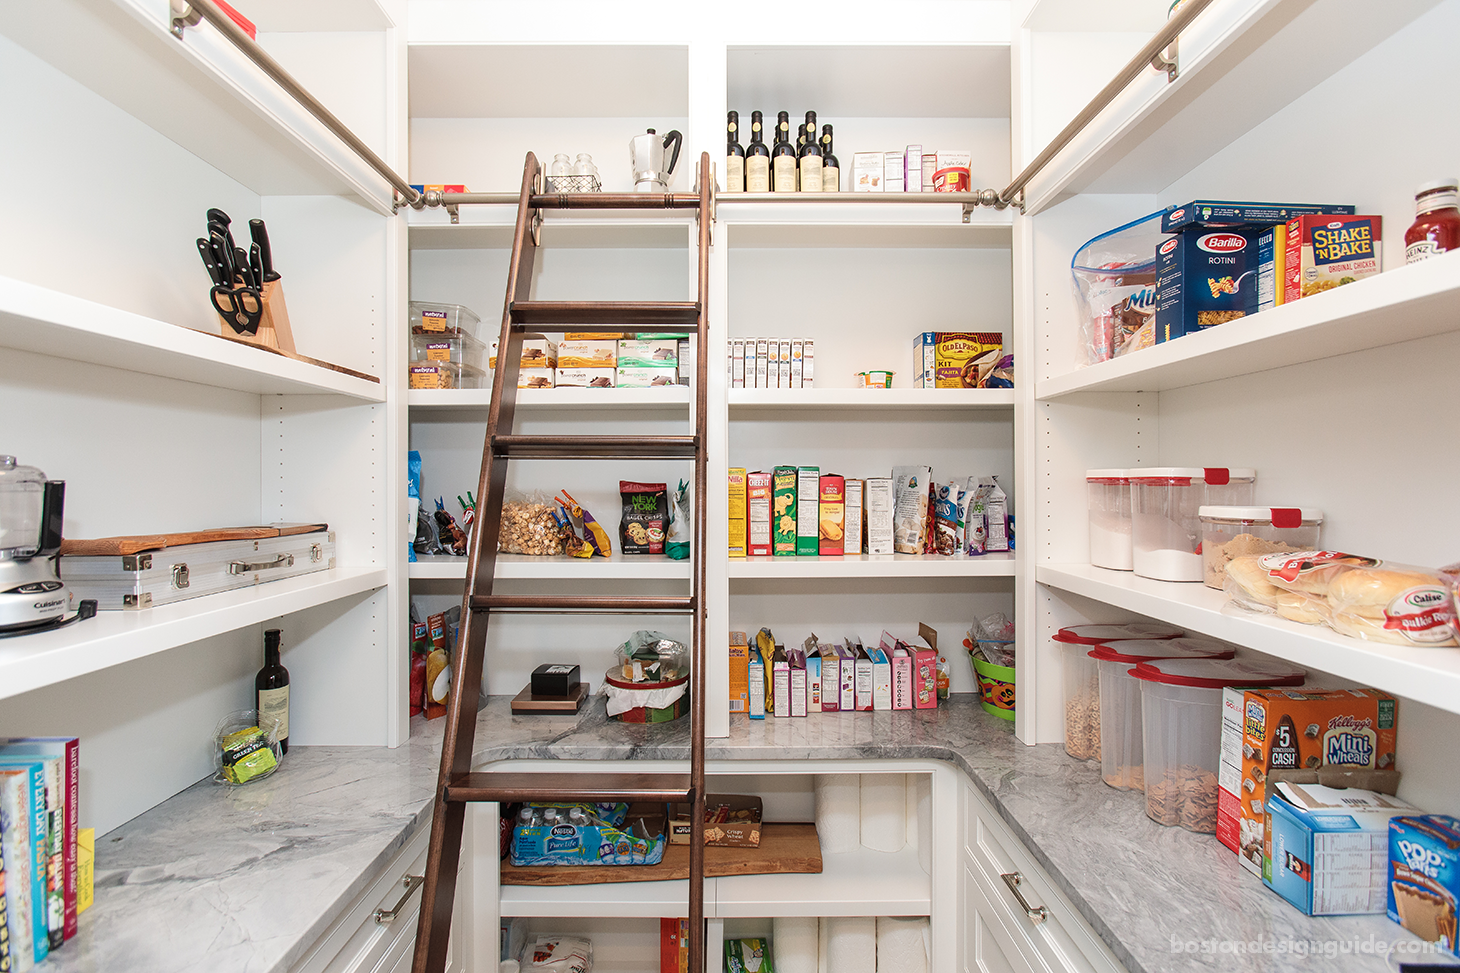 Kitchen Organization and Pantry Design Dreams - Hither & Thither